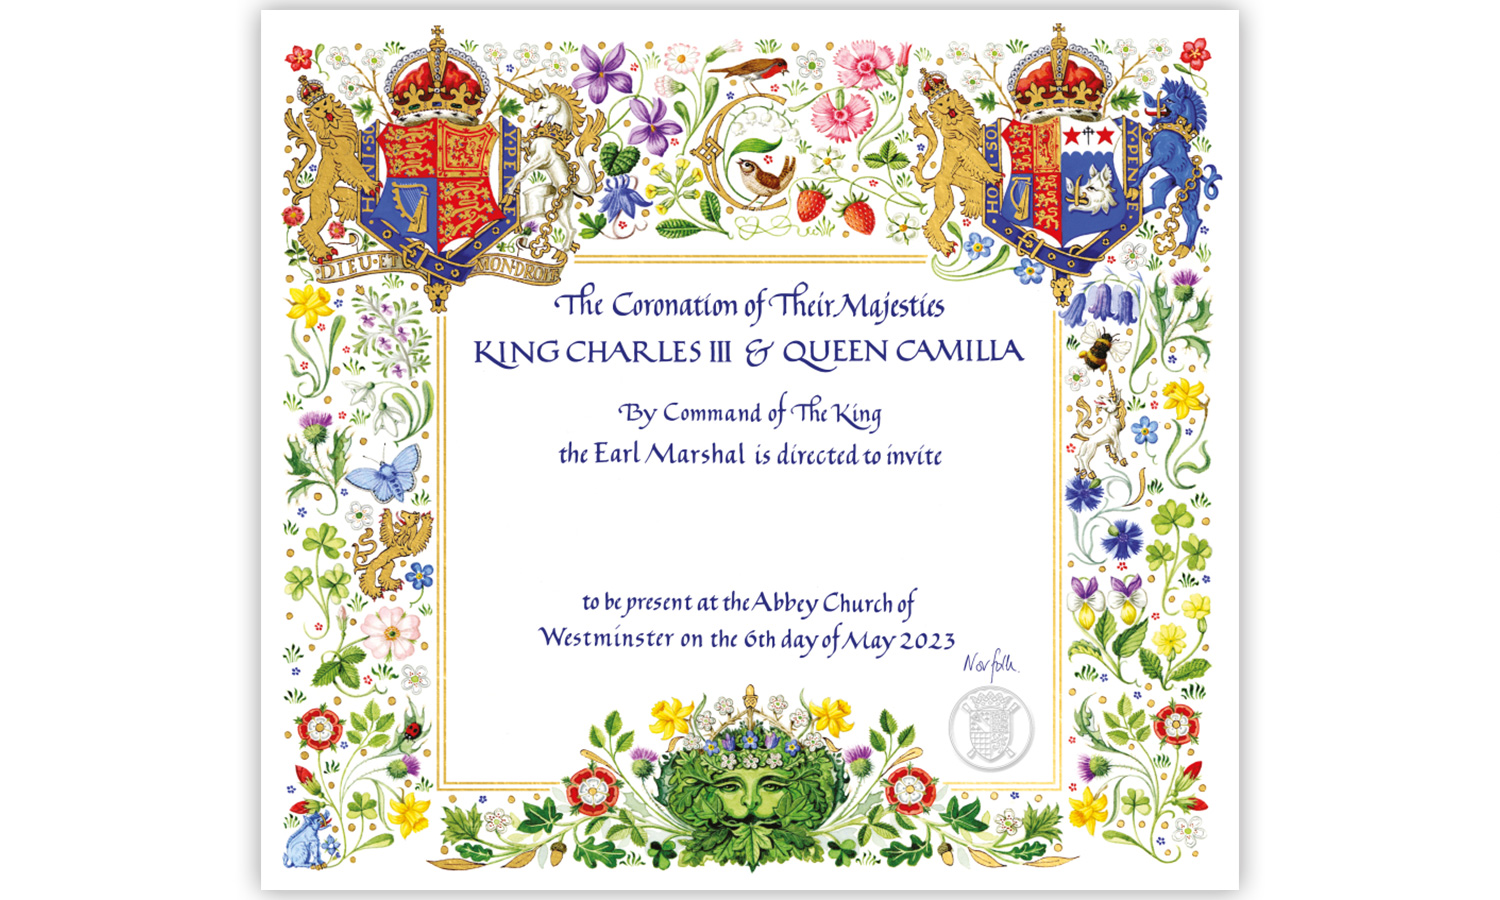 An image of the official invitations to King Charles III's coronation.